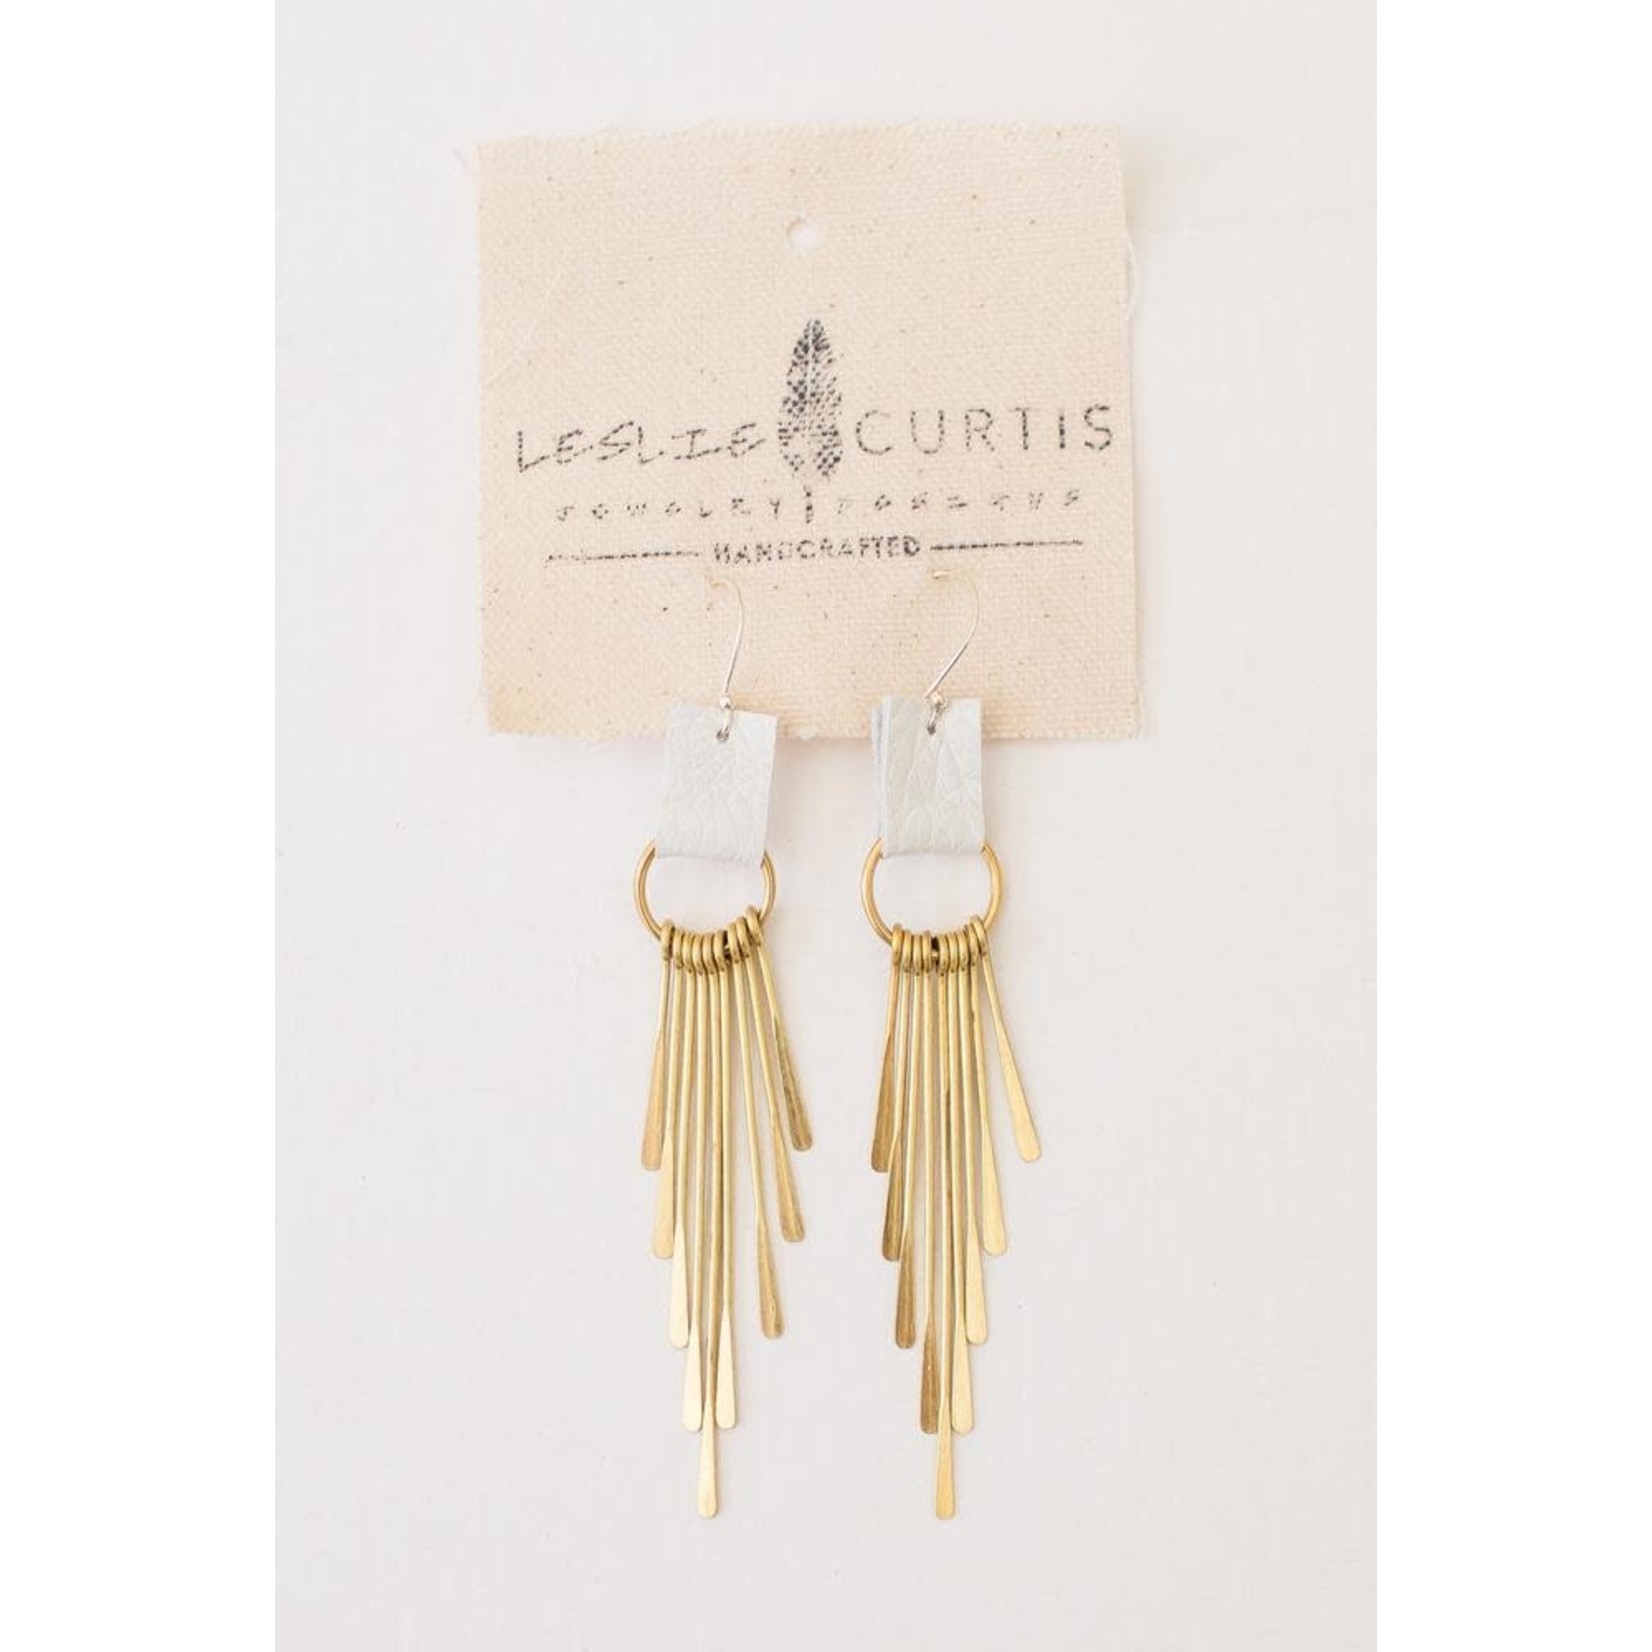 Leslie Curtis Jewelry Designs Coco White Leather Fringe Earrings